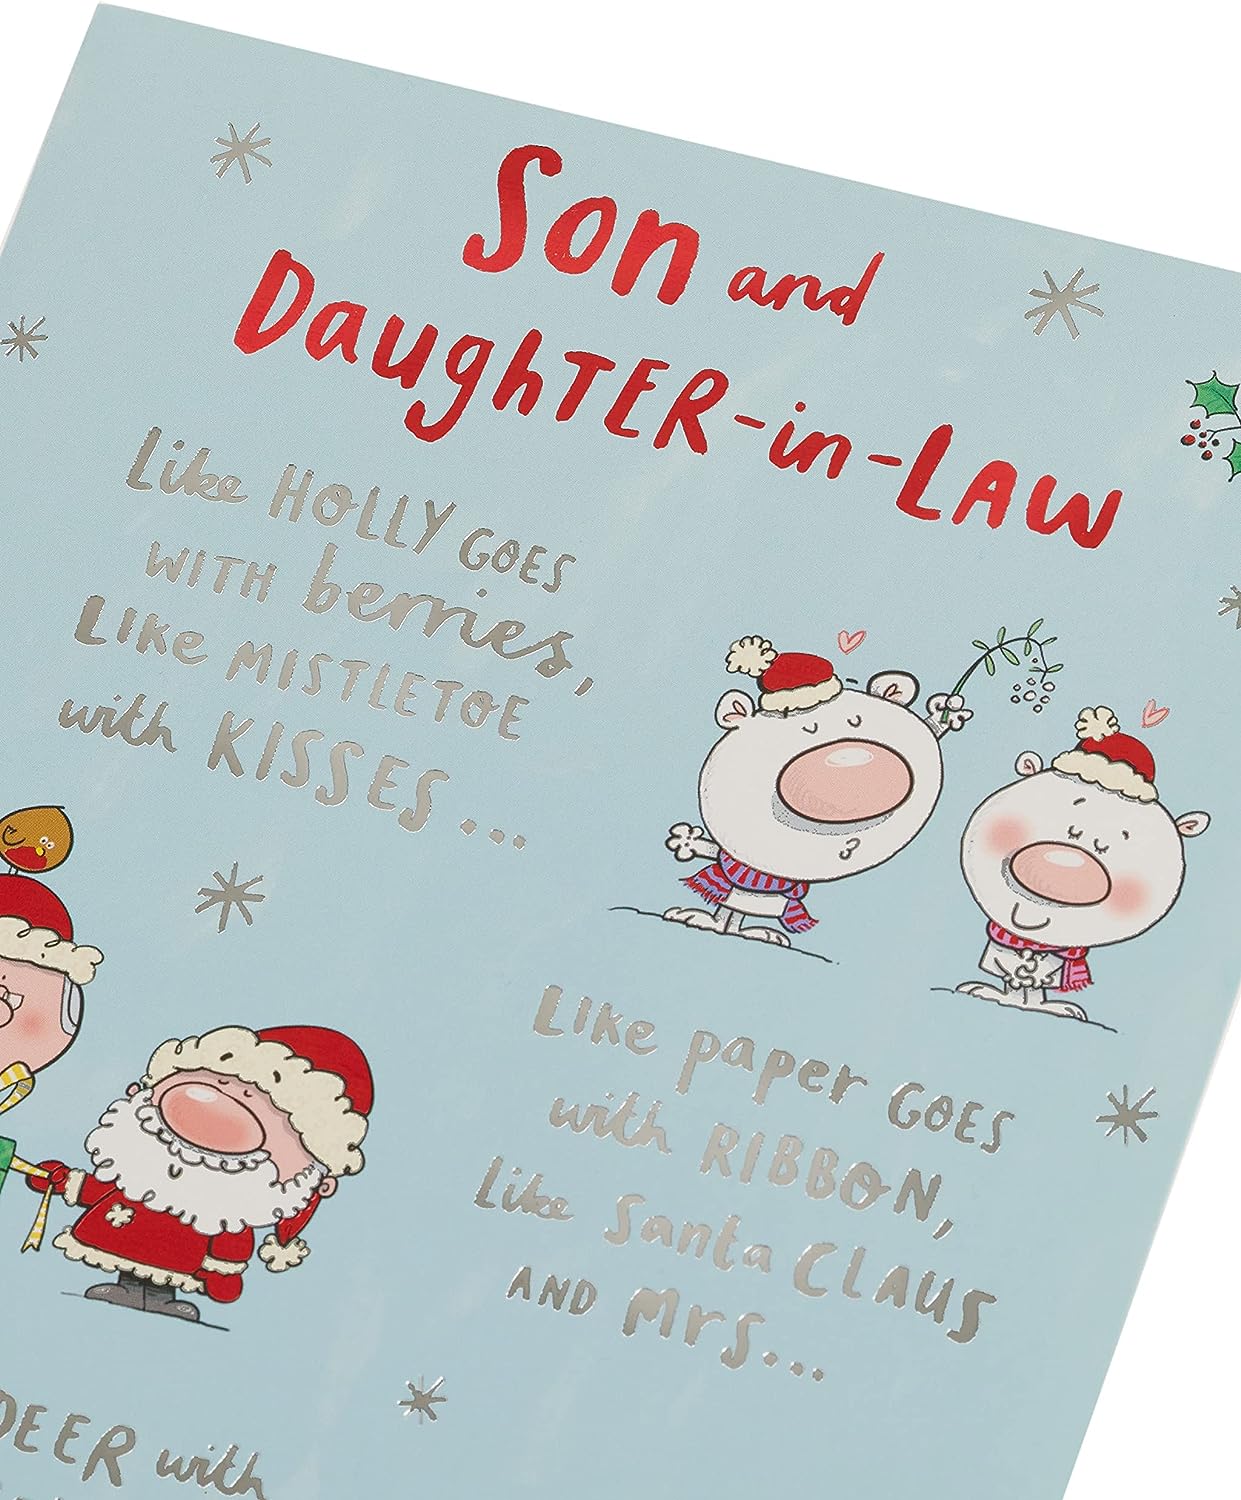 Son & Daughter-In-Law Christmas Card Red & Silver Foil Design 